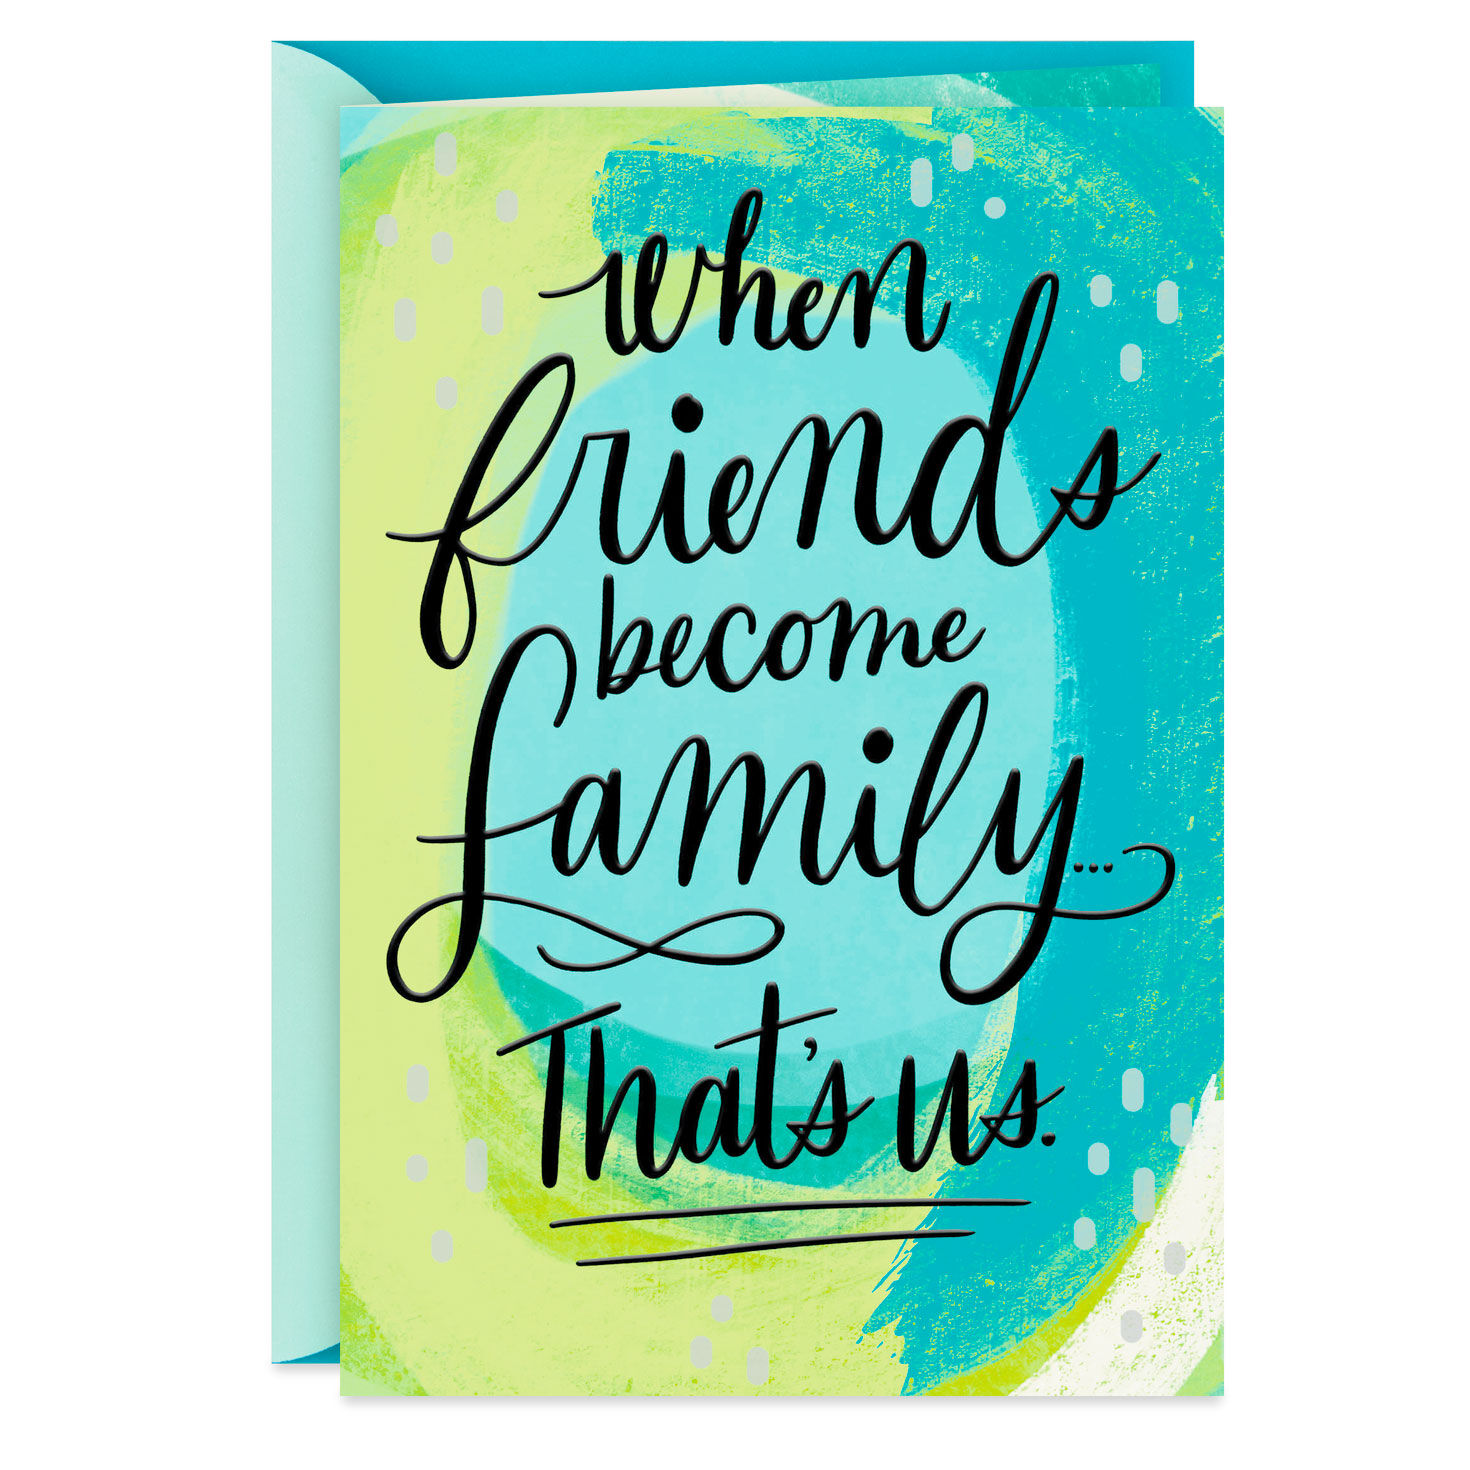 Lettering On Green And Yellow Swirl Friendship Card 299MHF9828 01 ?sfrm=jpg